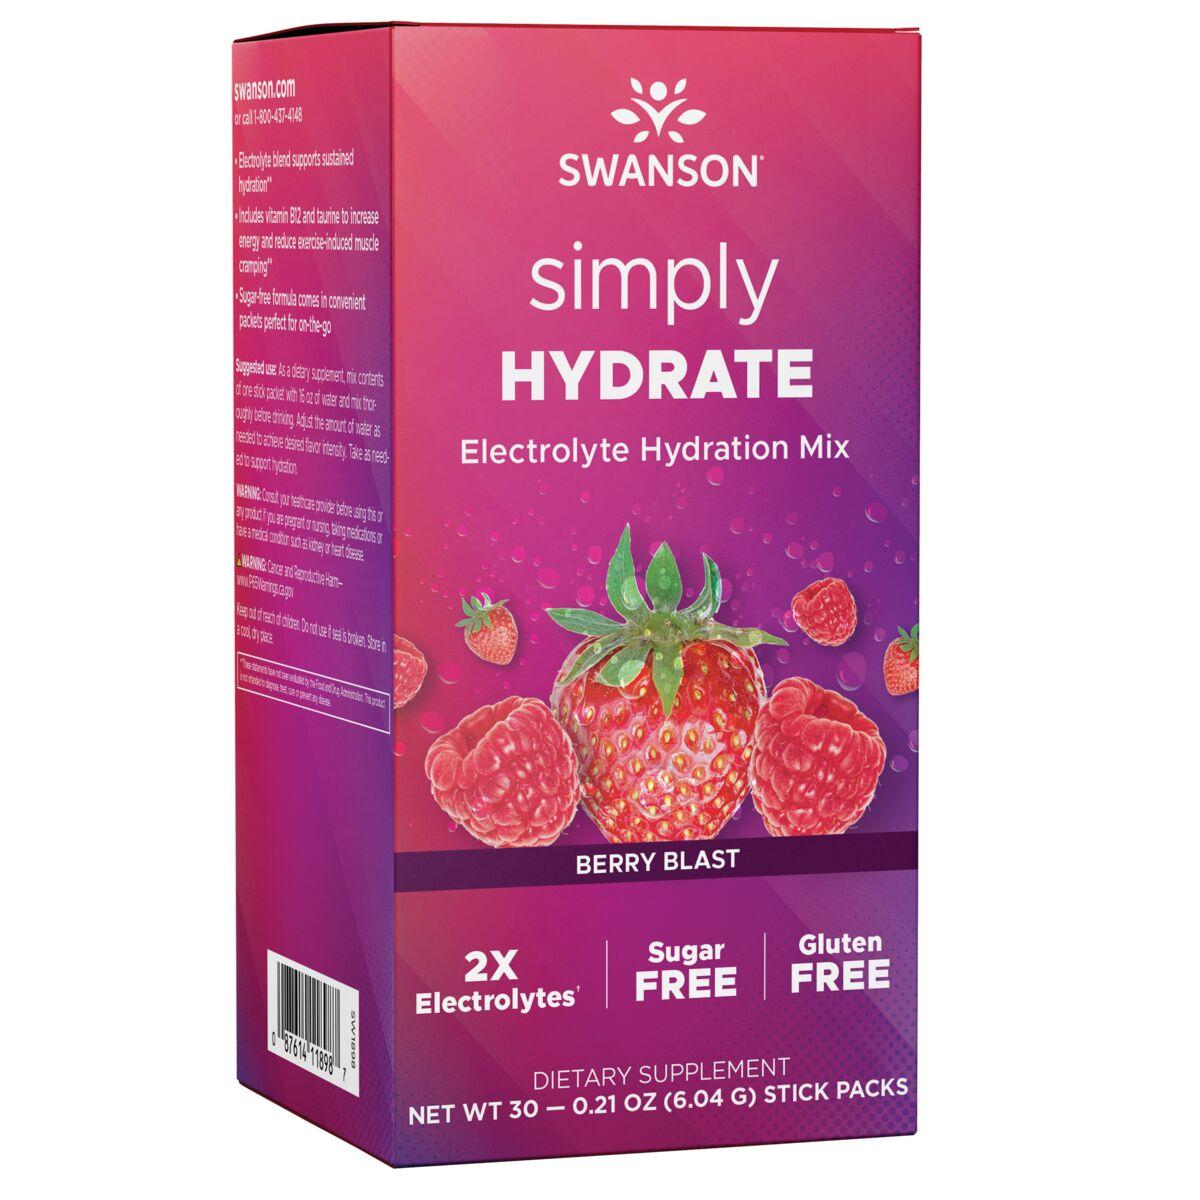 Swanson Premium simply Hydrate Electrolyte Hydration Mix - Berry Blast Vitamin | 30 Packets